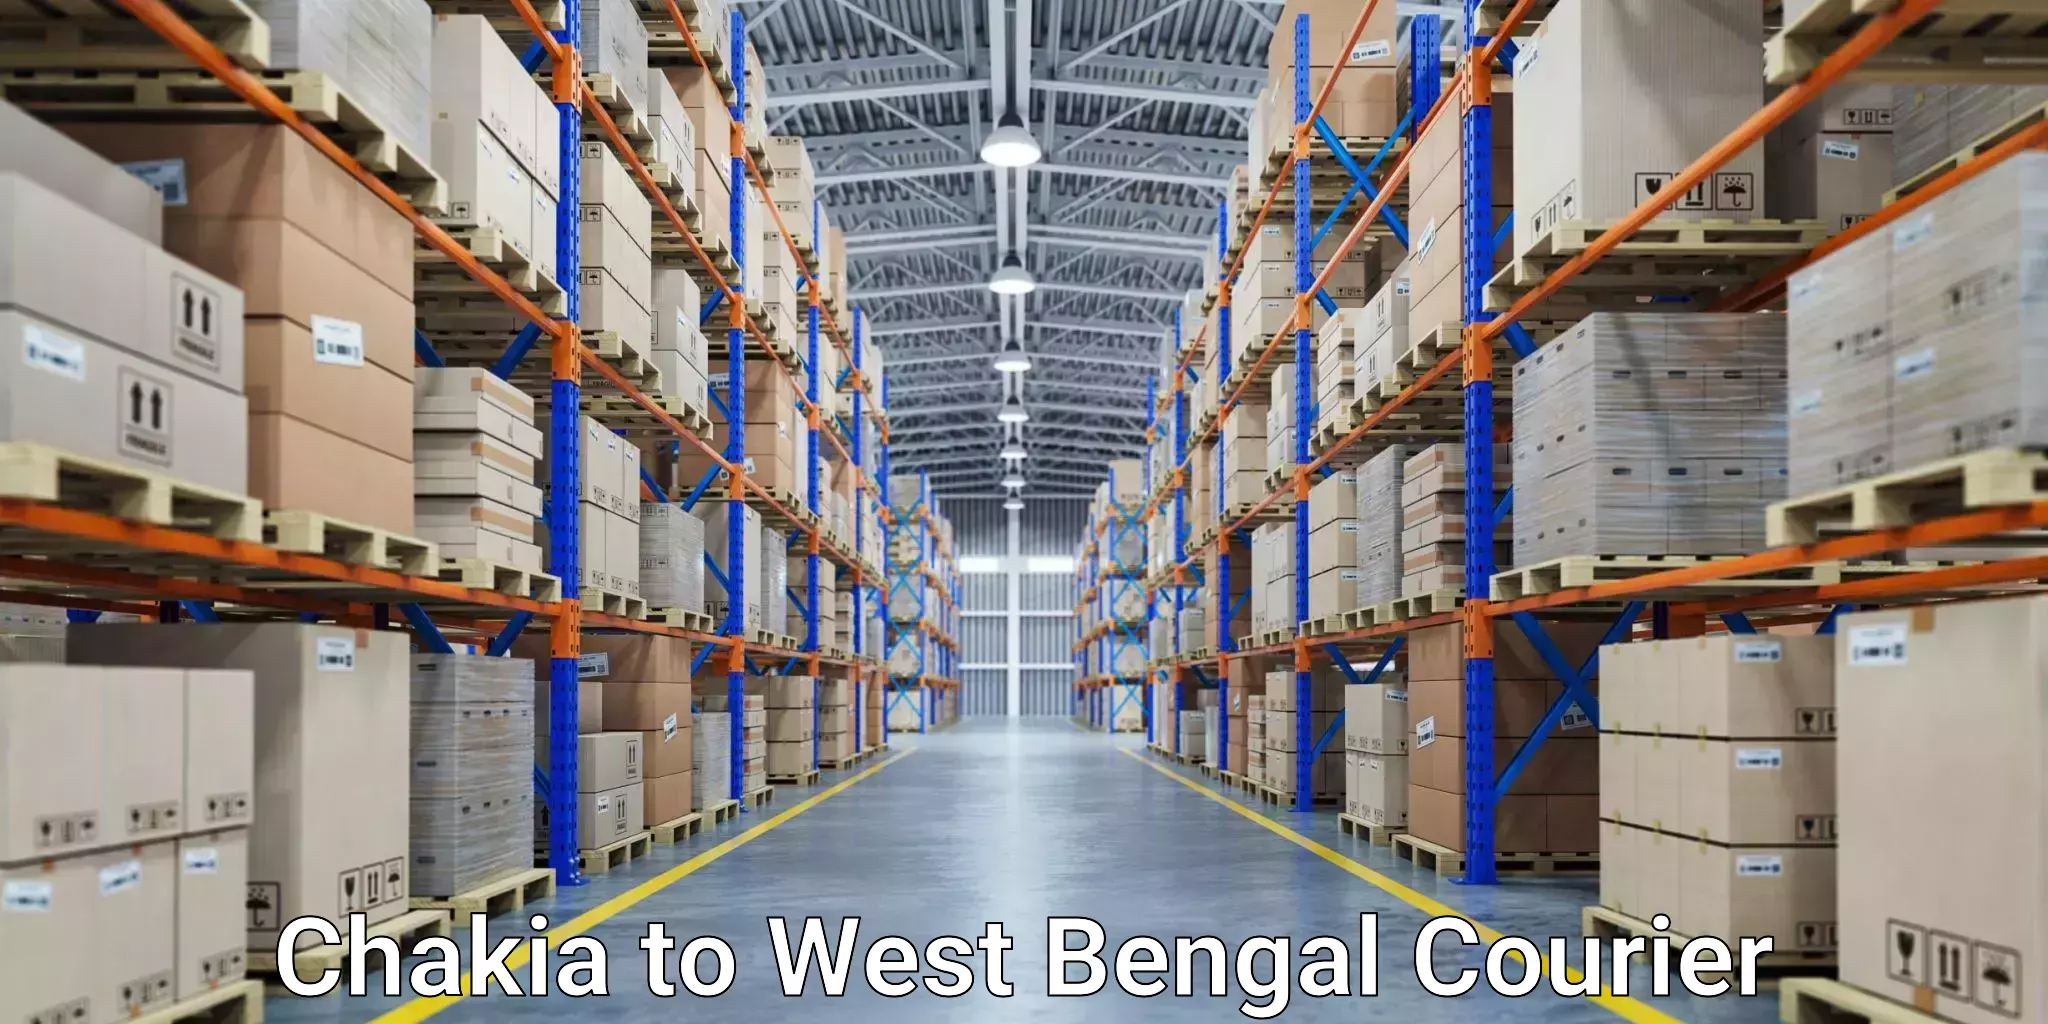 Professional courier handling Chakia to West Bengal